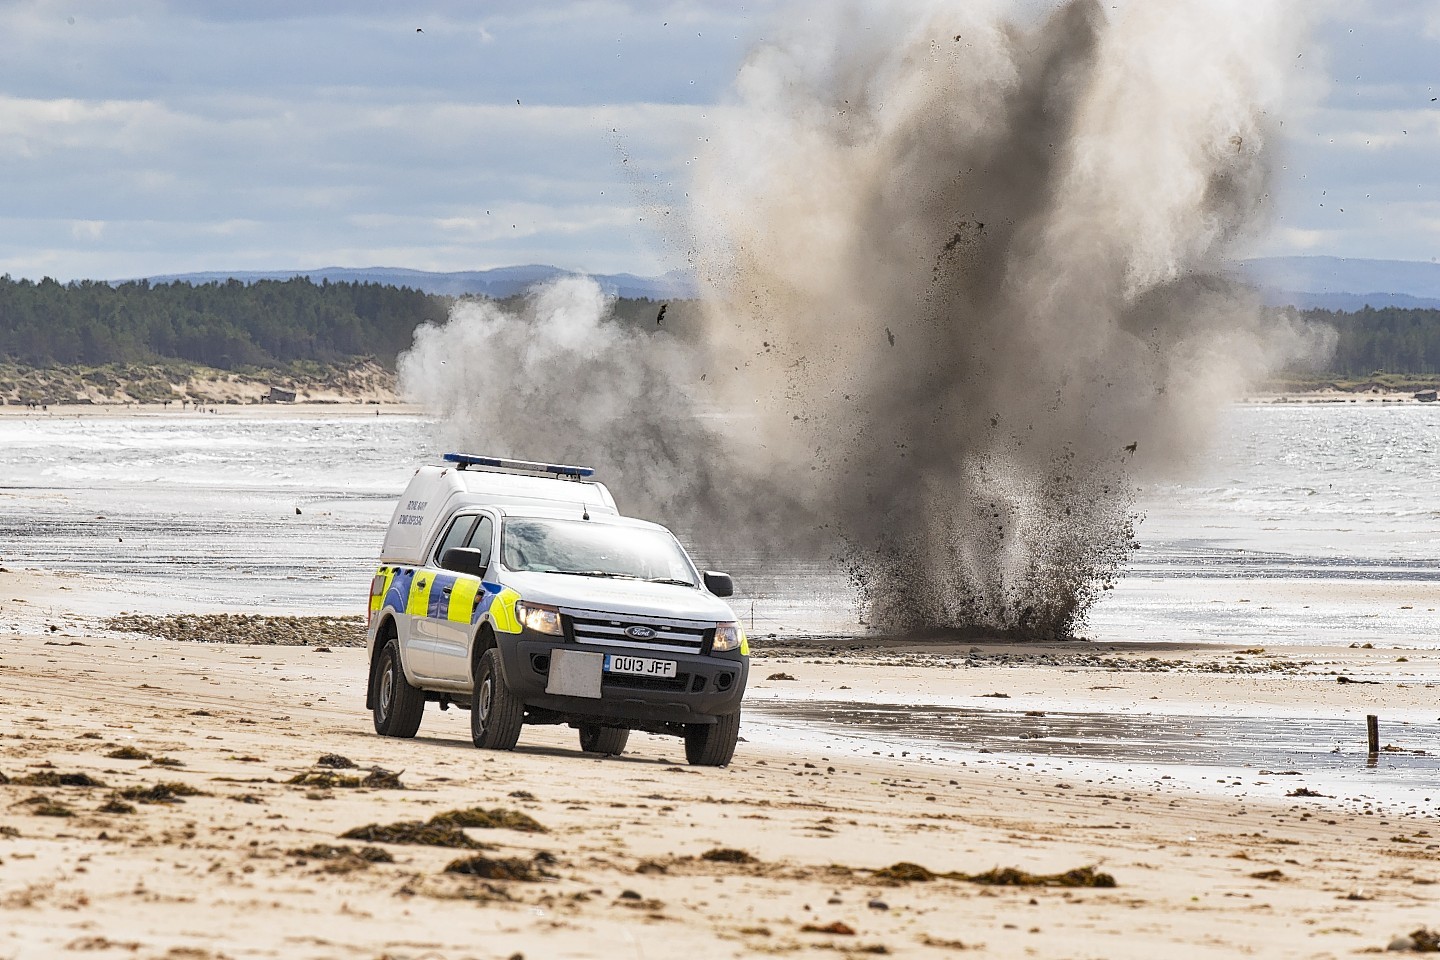 The controlled explosion on Burghead beach